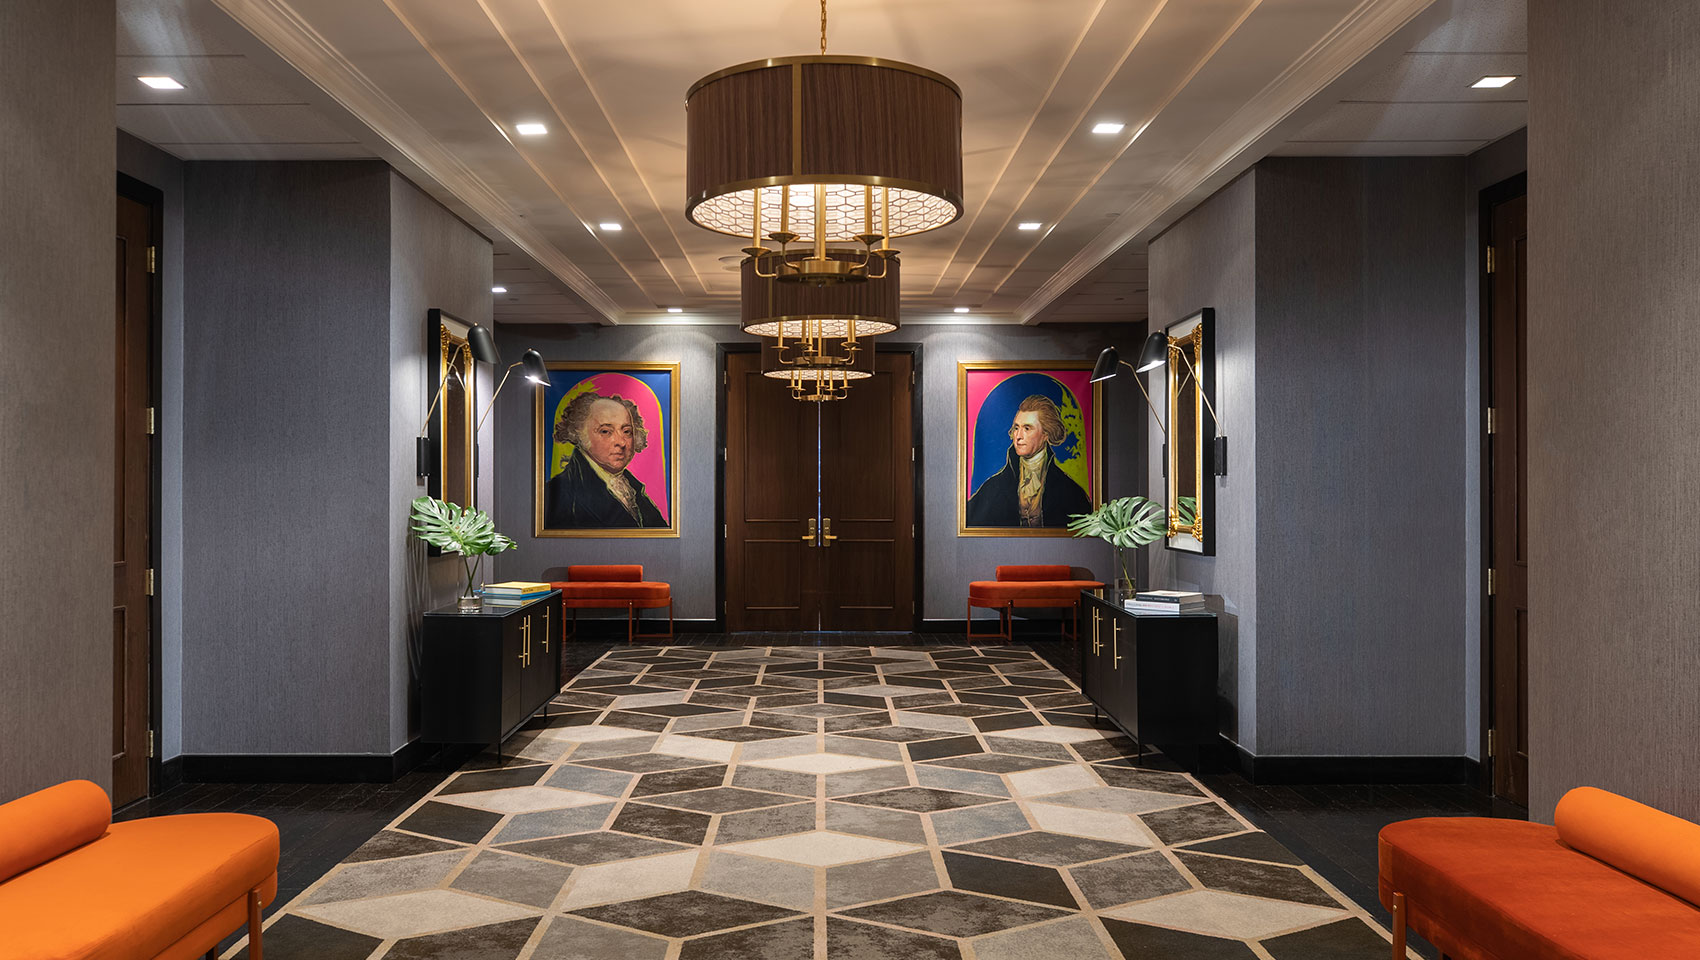 Kimpton Hotel Palomar Philadelphia 24th floor meeting + event foyer area showing geometric carpet in open area, brightly colored plush seating, and a series of circular lighting fixtures 